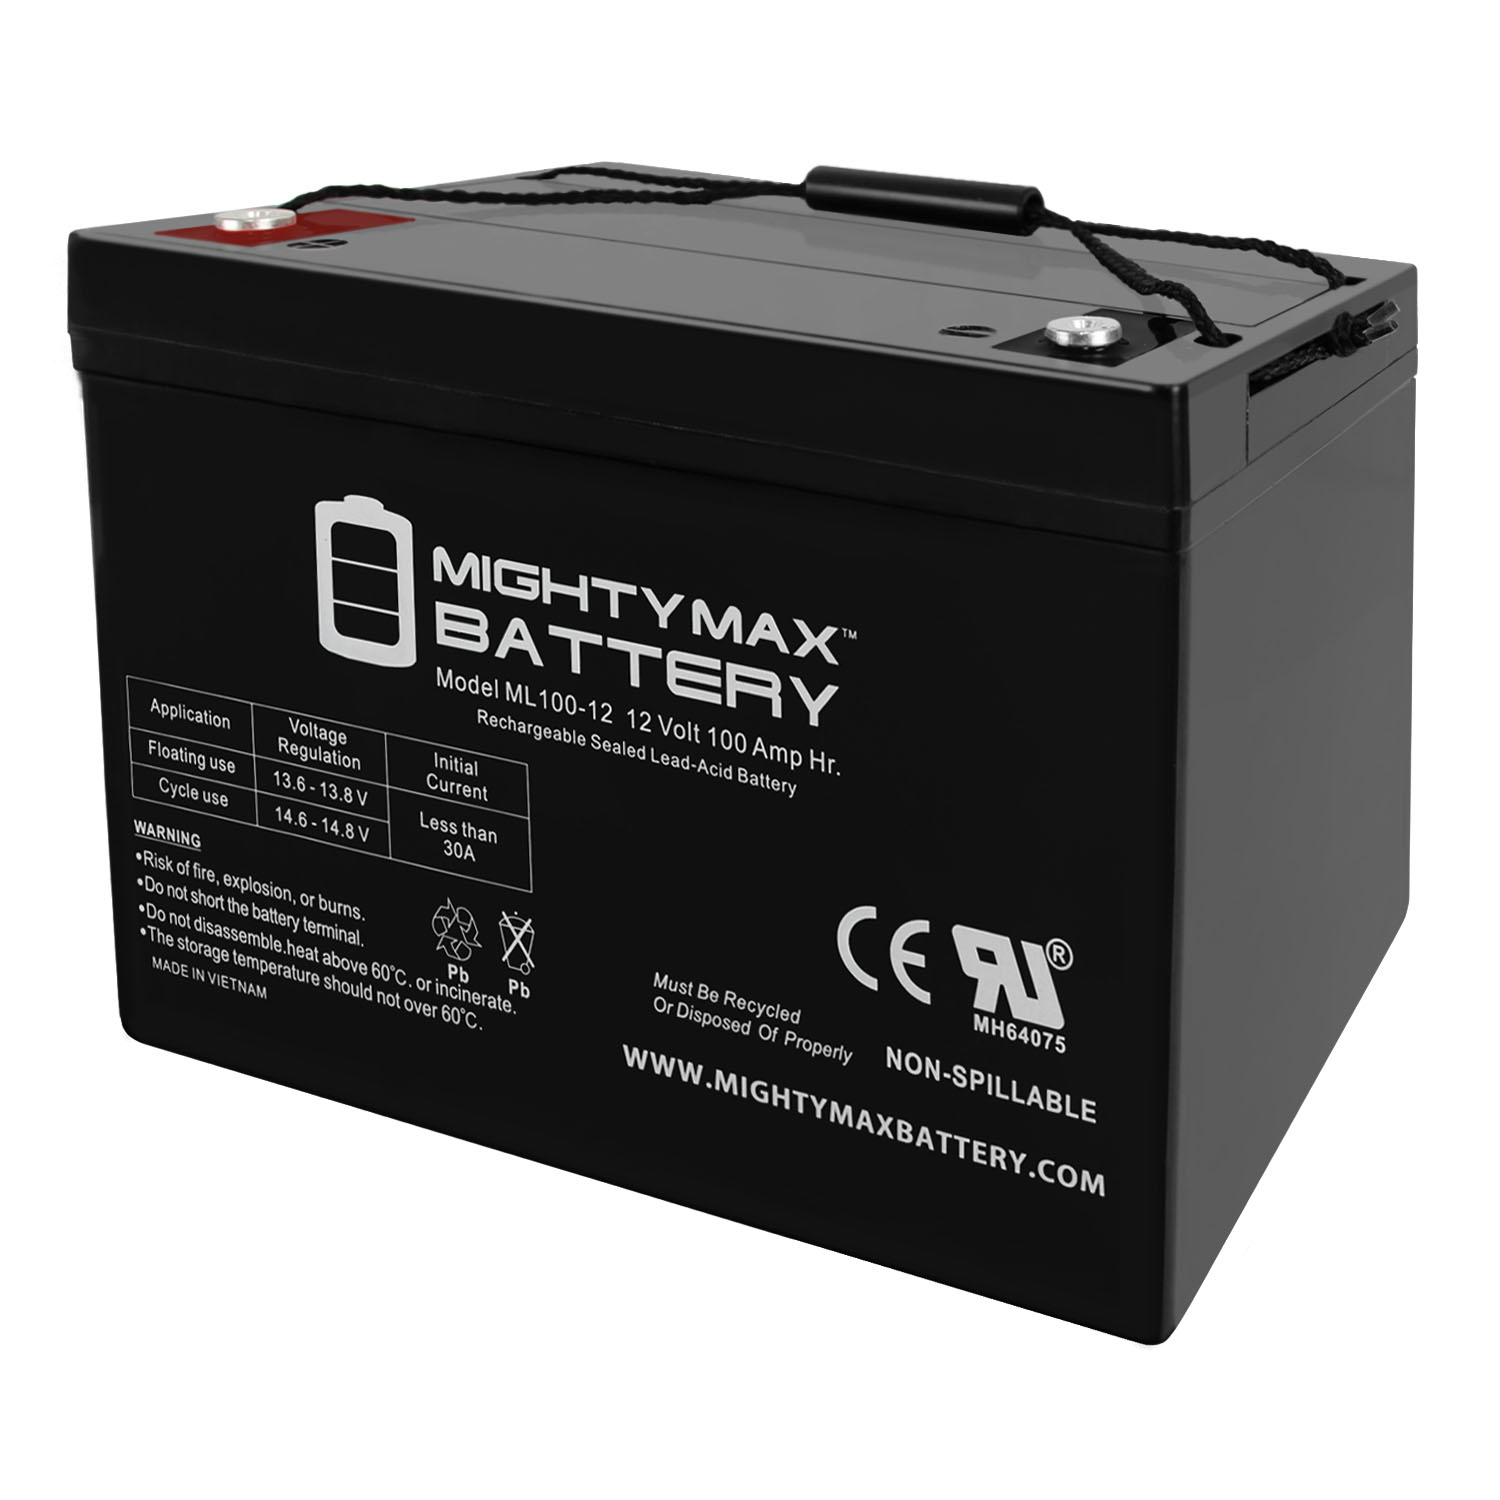 12V 100AH Deep Cycle Gel Battery Rechargeable for Solar, Wind, RV, Marine,  Camping, Wheelchair, Trolling Motor and Off Grid Applications